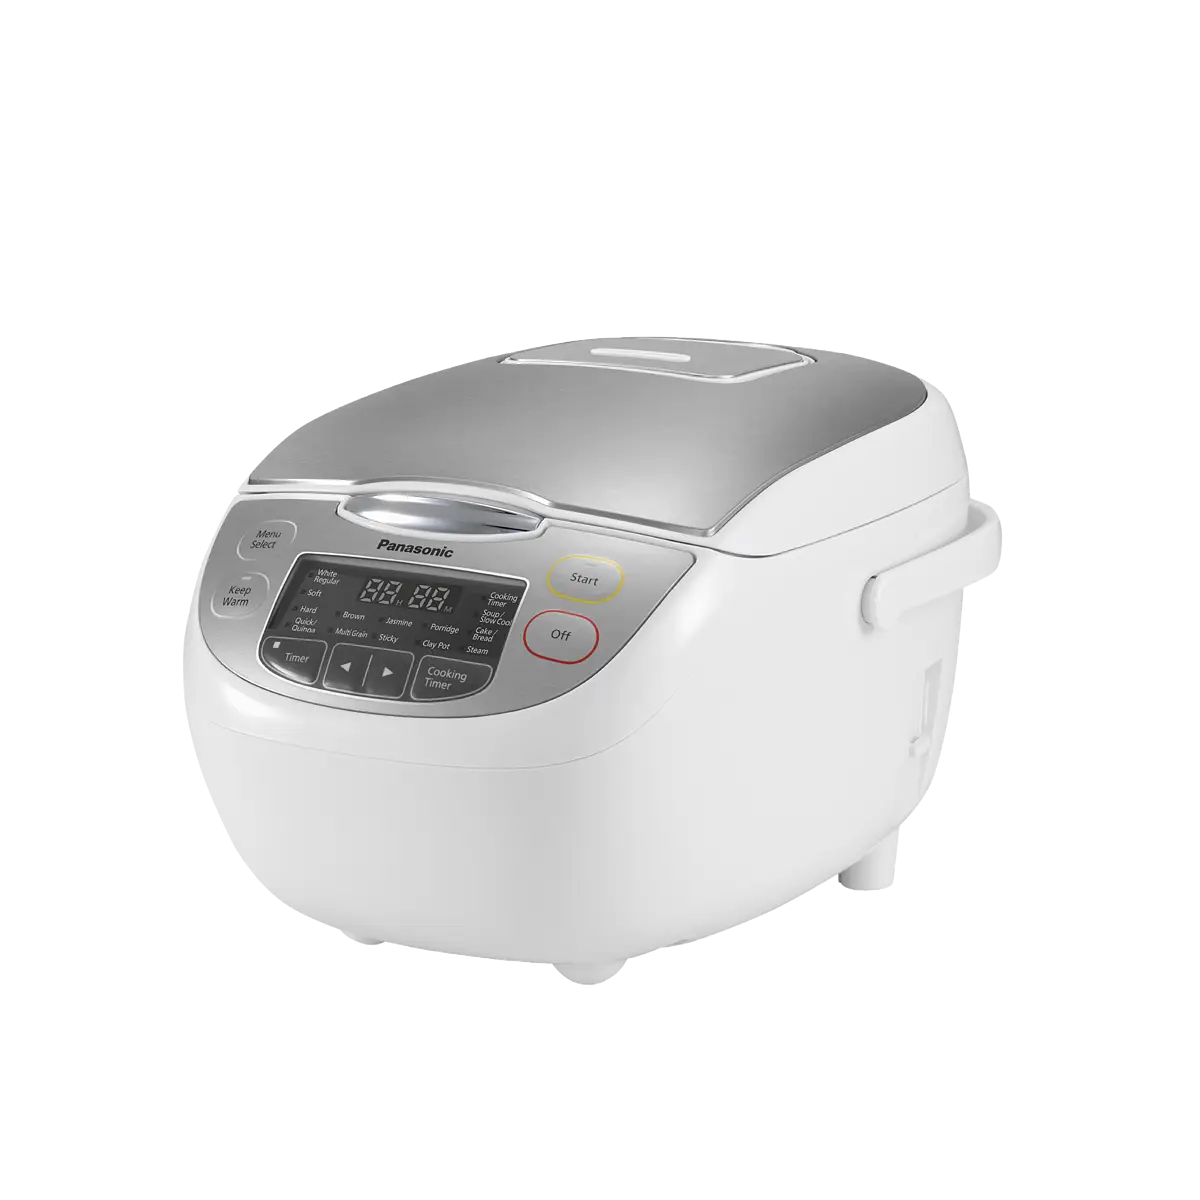 How To Use A Panasonic Rice Cooker